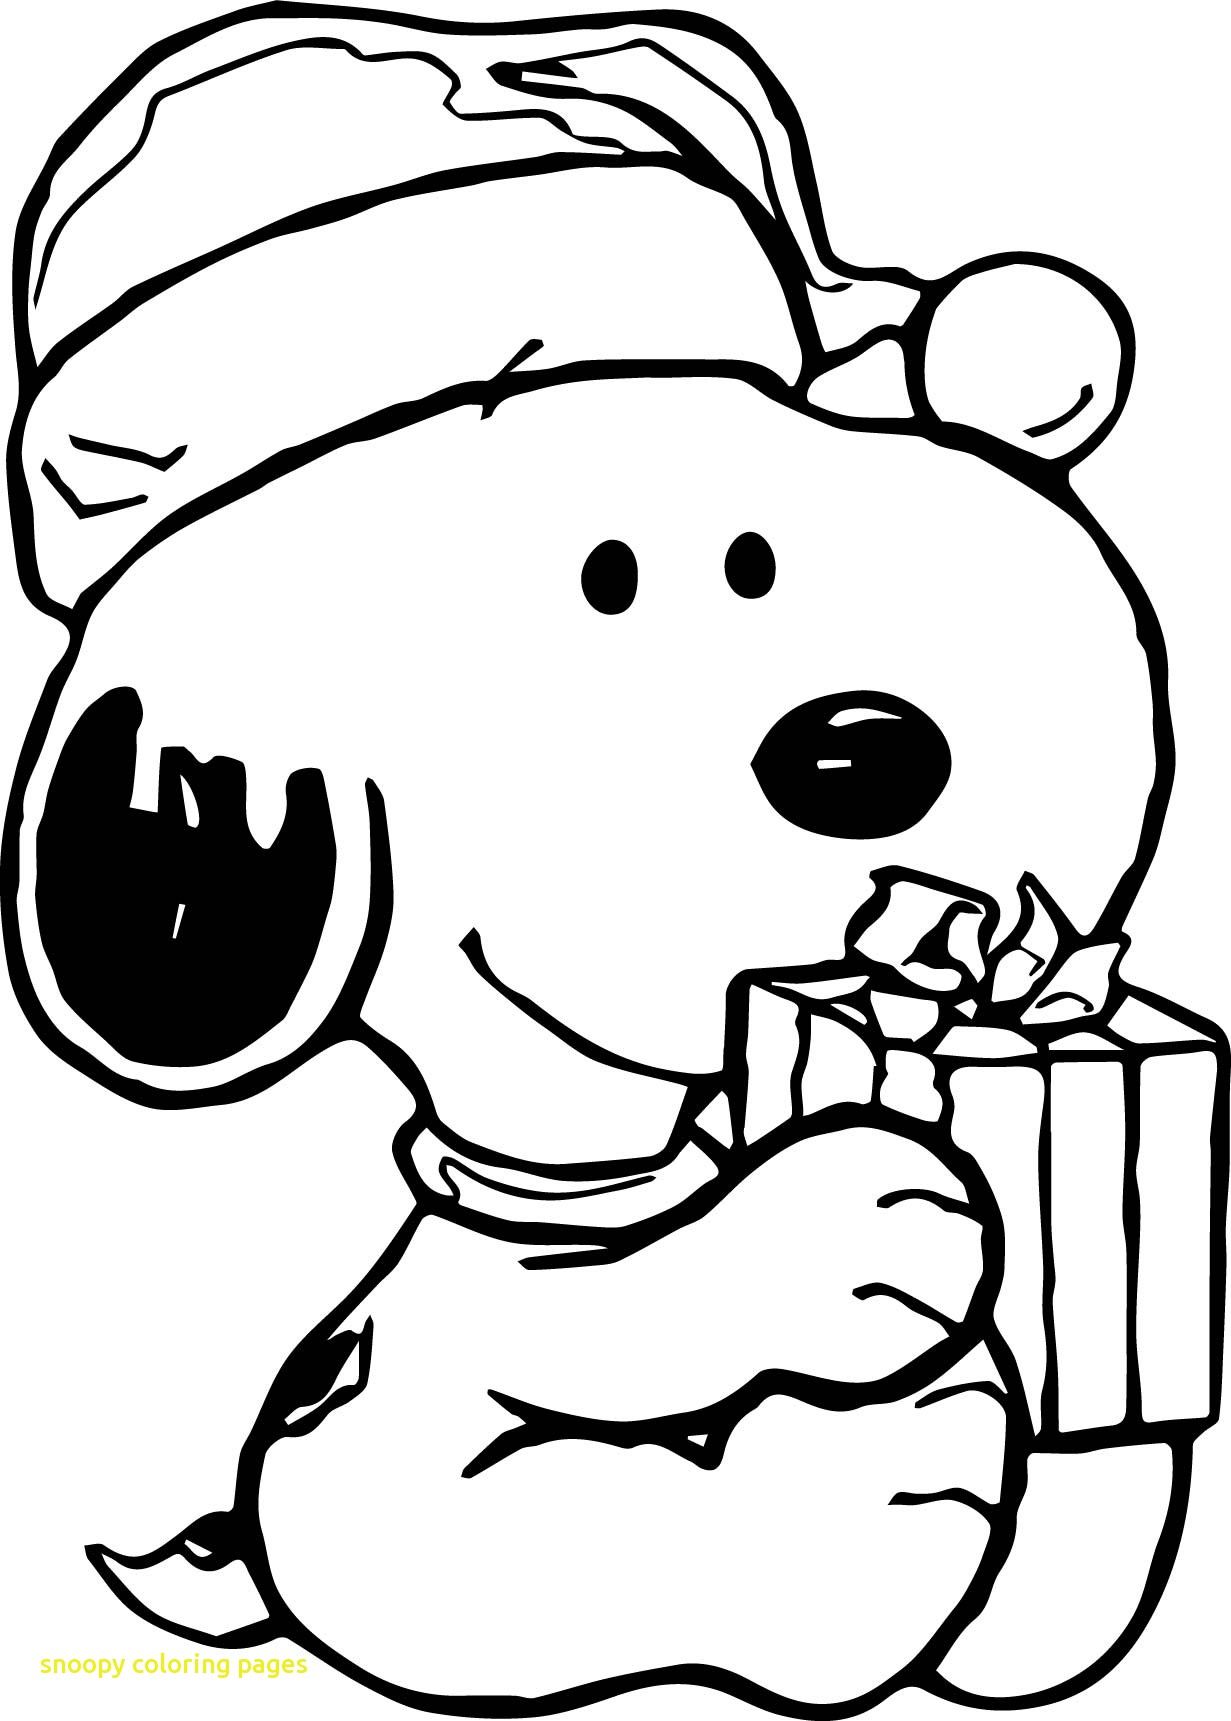 Snoopy Birthday Coloring Pages at Free printable